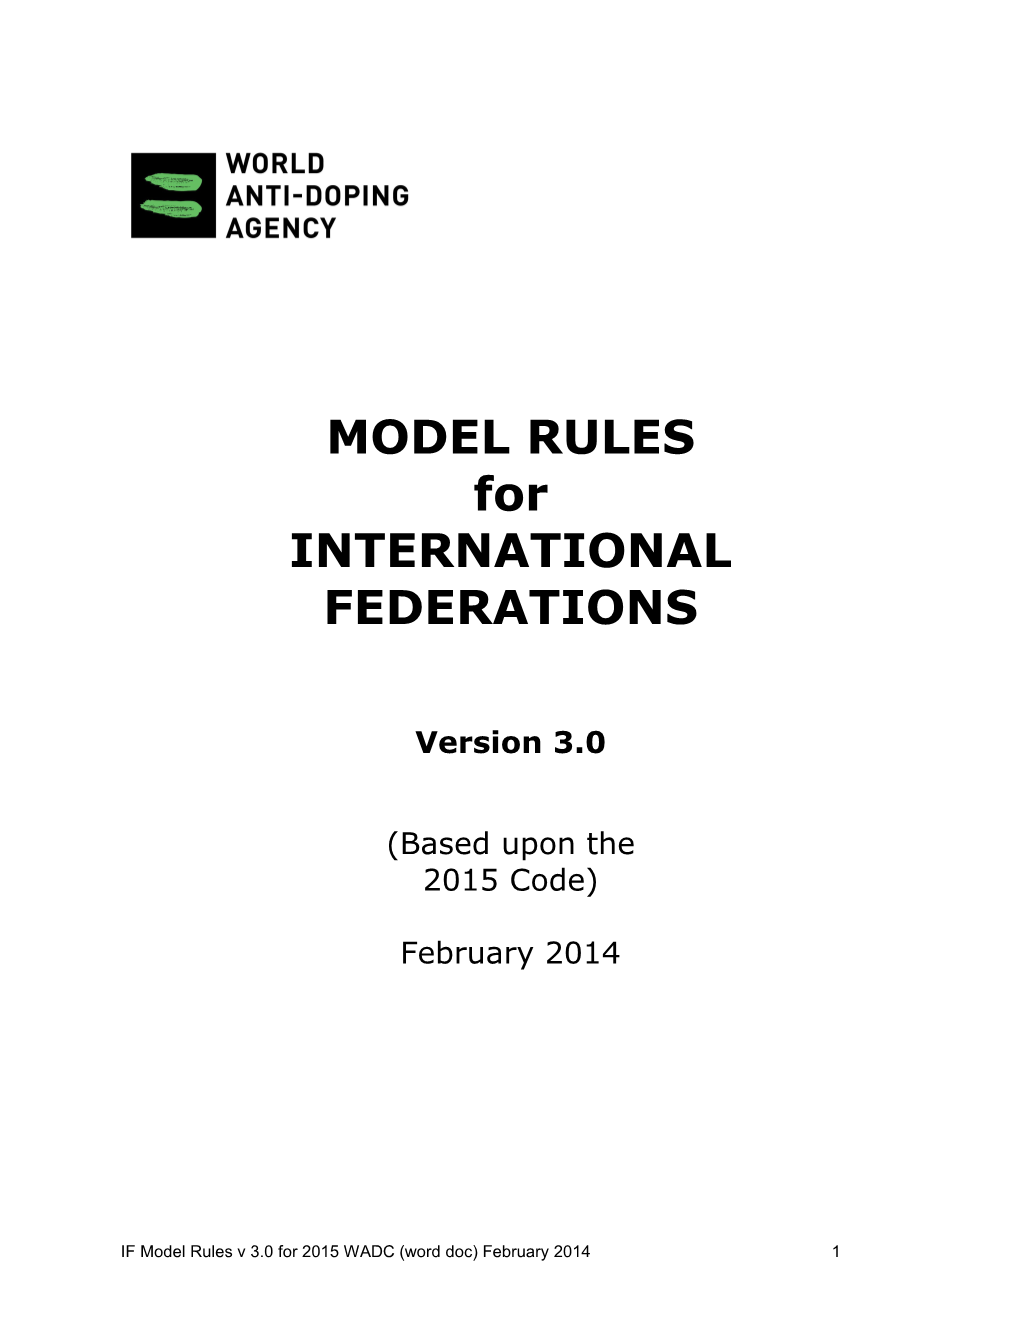 Model Rules for International Federations